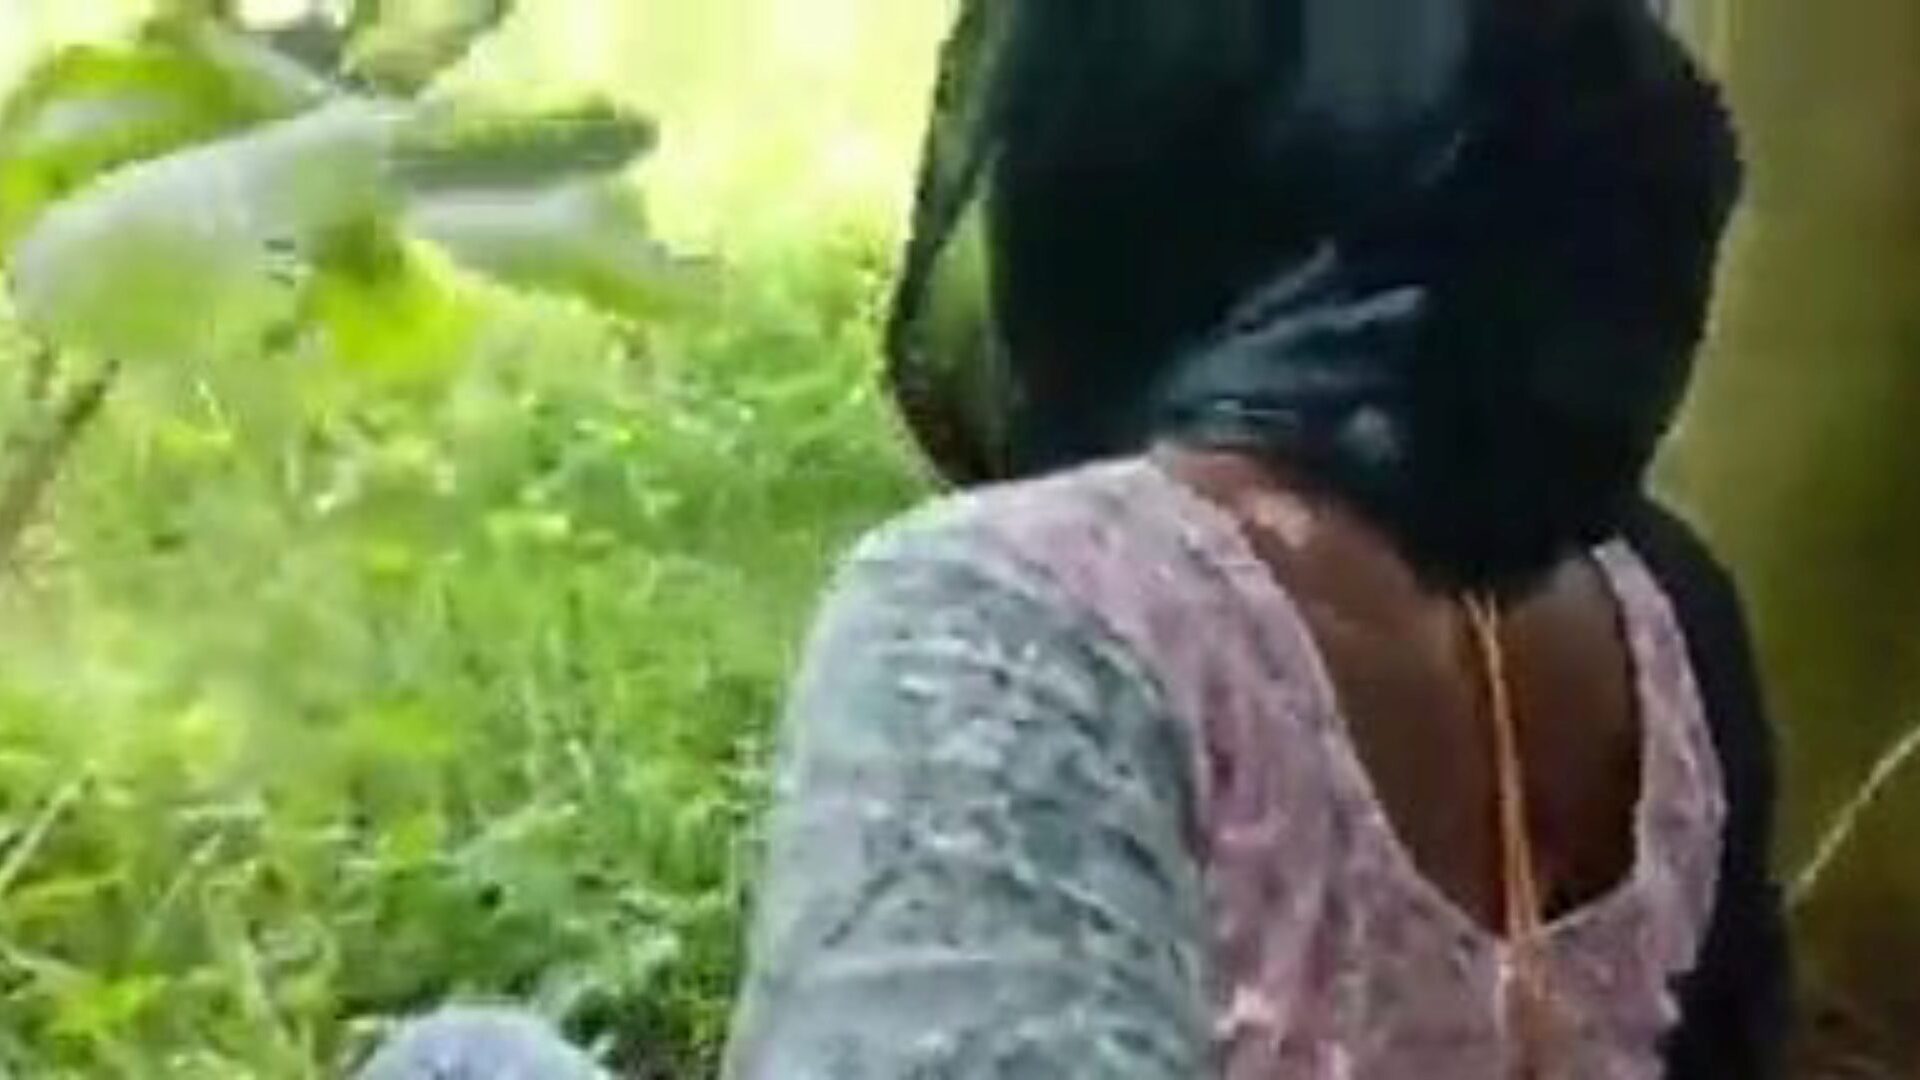 Aunty Fucked in Forest Outdoors, Free Porn 90: xHamster Watch Aunty Fucked in Forest Outdoors video on xHamster, the fattest fucky-fucky tube web page with tons of free Indian New Aunty & Homemade pornography clips